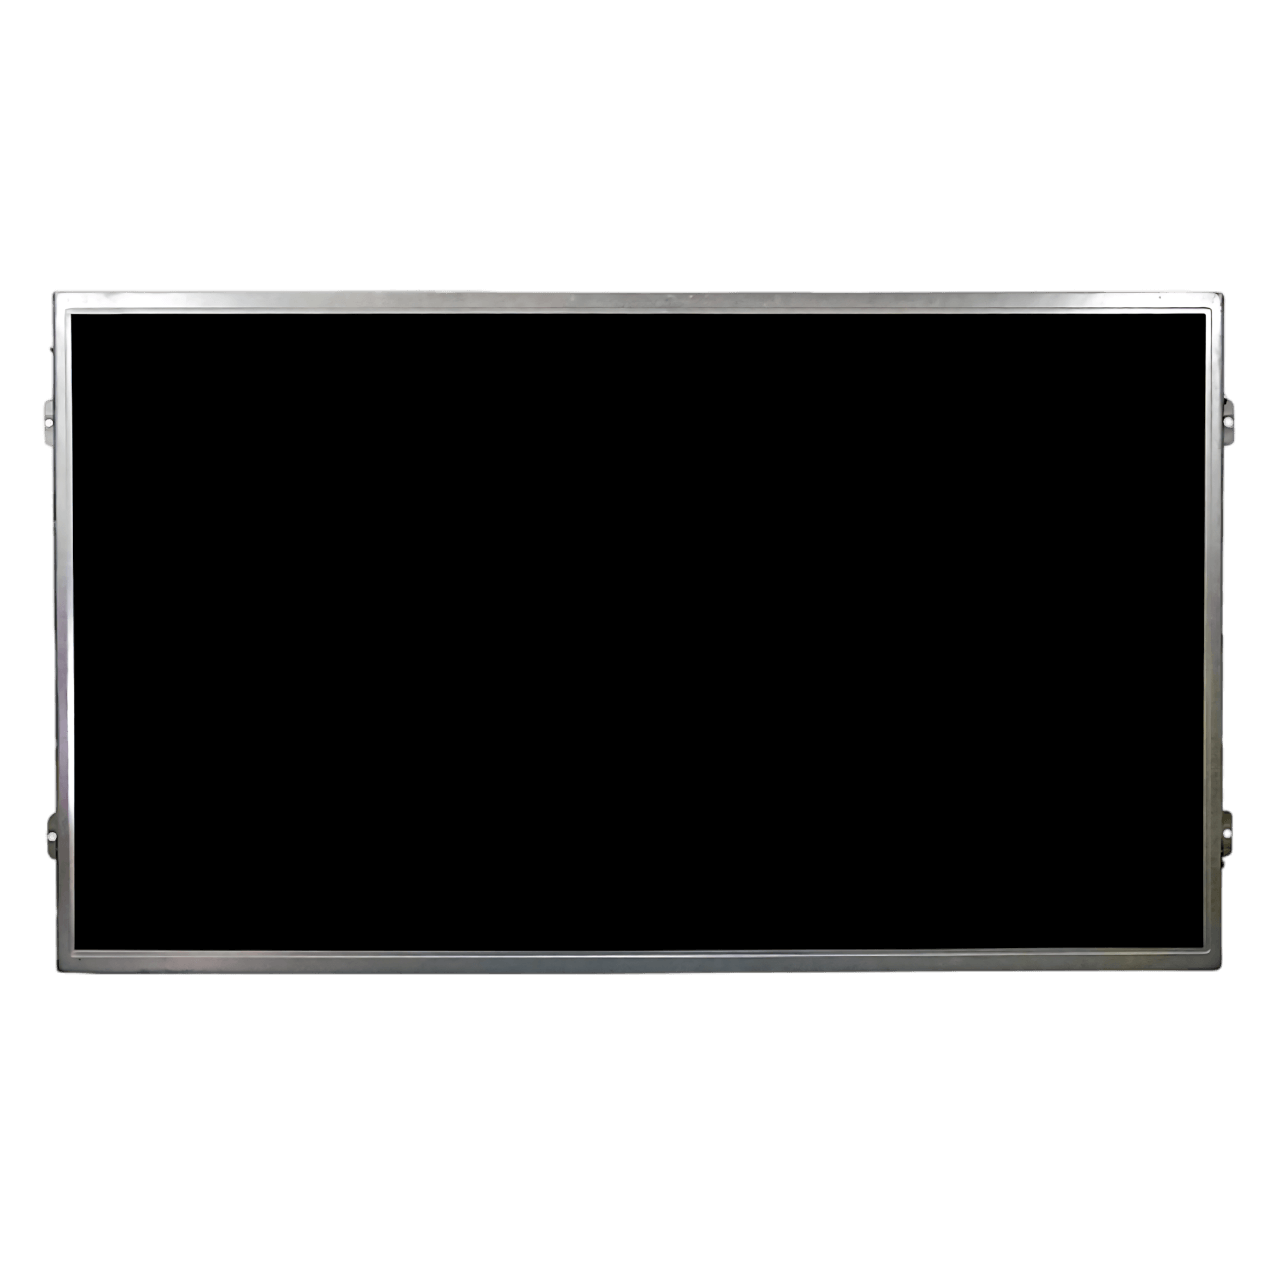 Boe MV185WHB-N20 18.5” Lcd Panel Backlight With Lvds Cable (40cm) 1366*768 30 PİNS 8-BİT 250 CD/M²